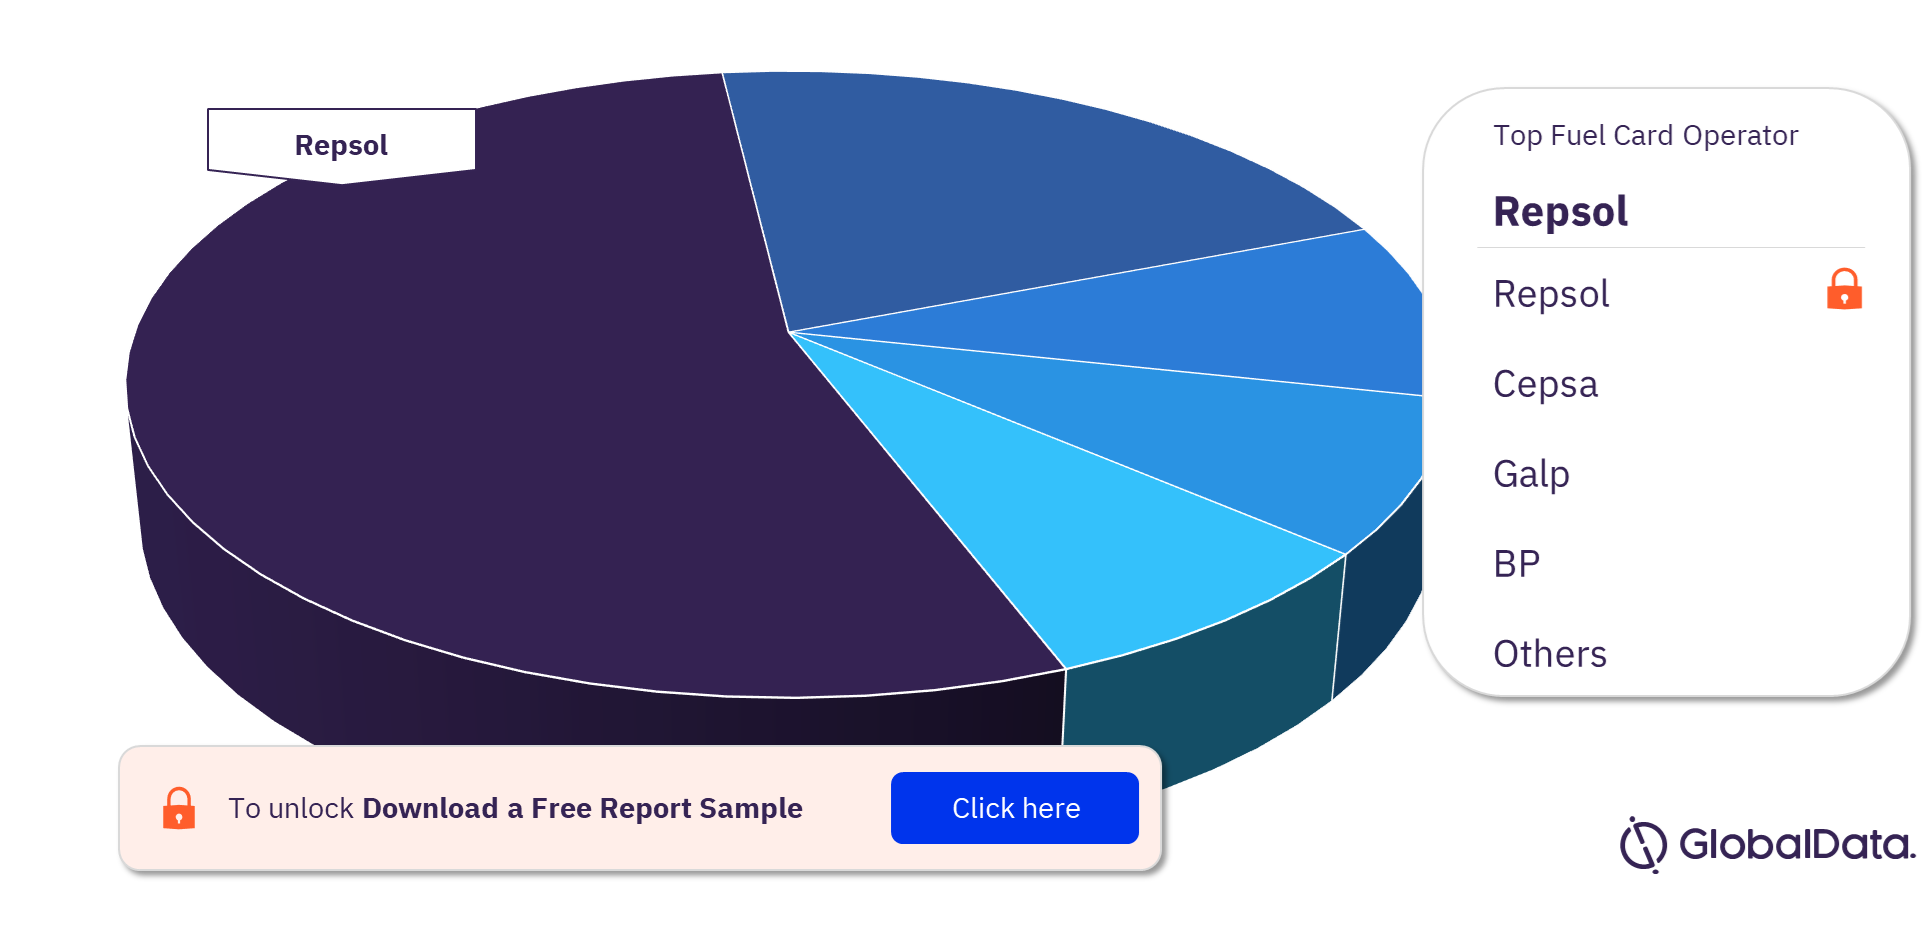 Spain Fuel Cards Market Analysis by Fuel Card Operators, 2022 (%)